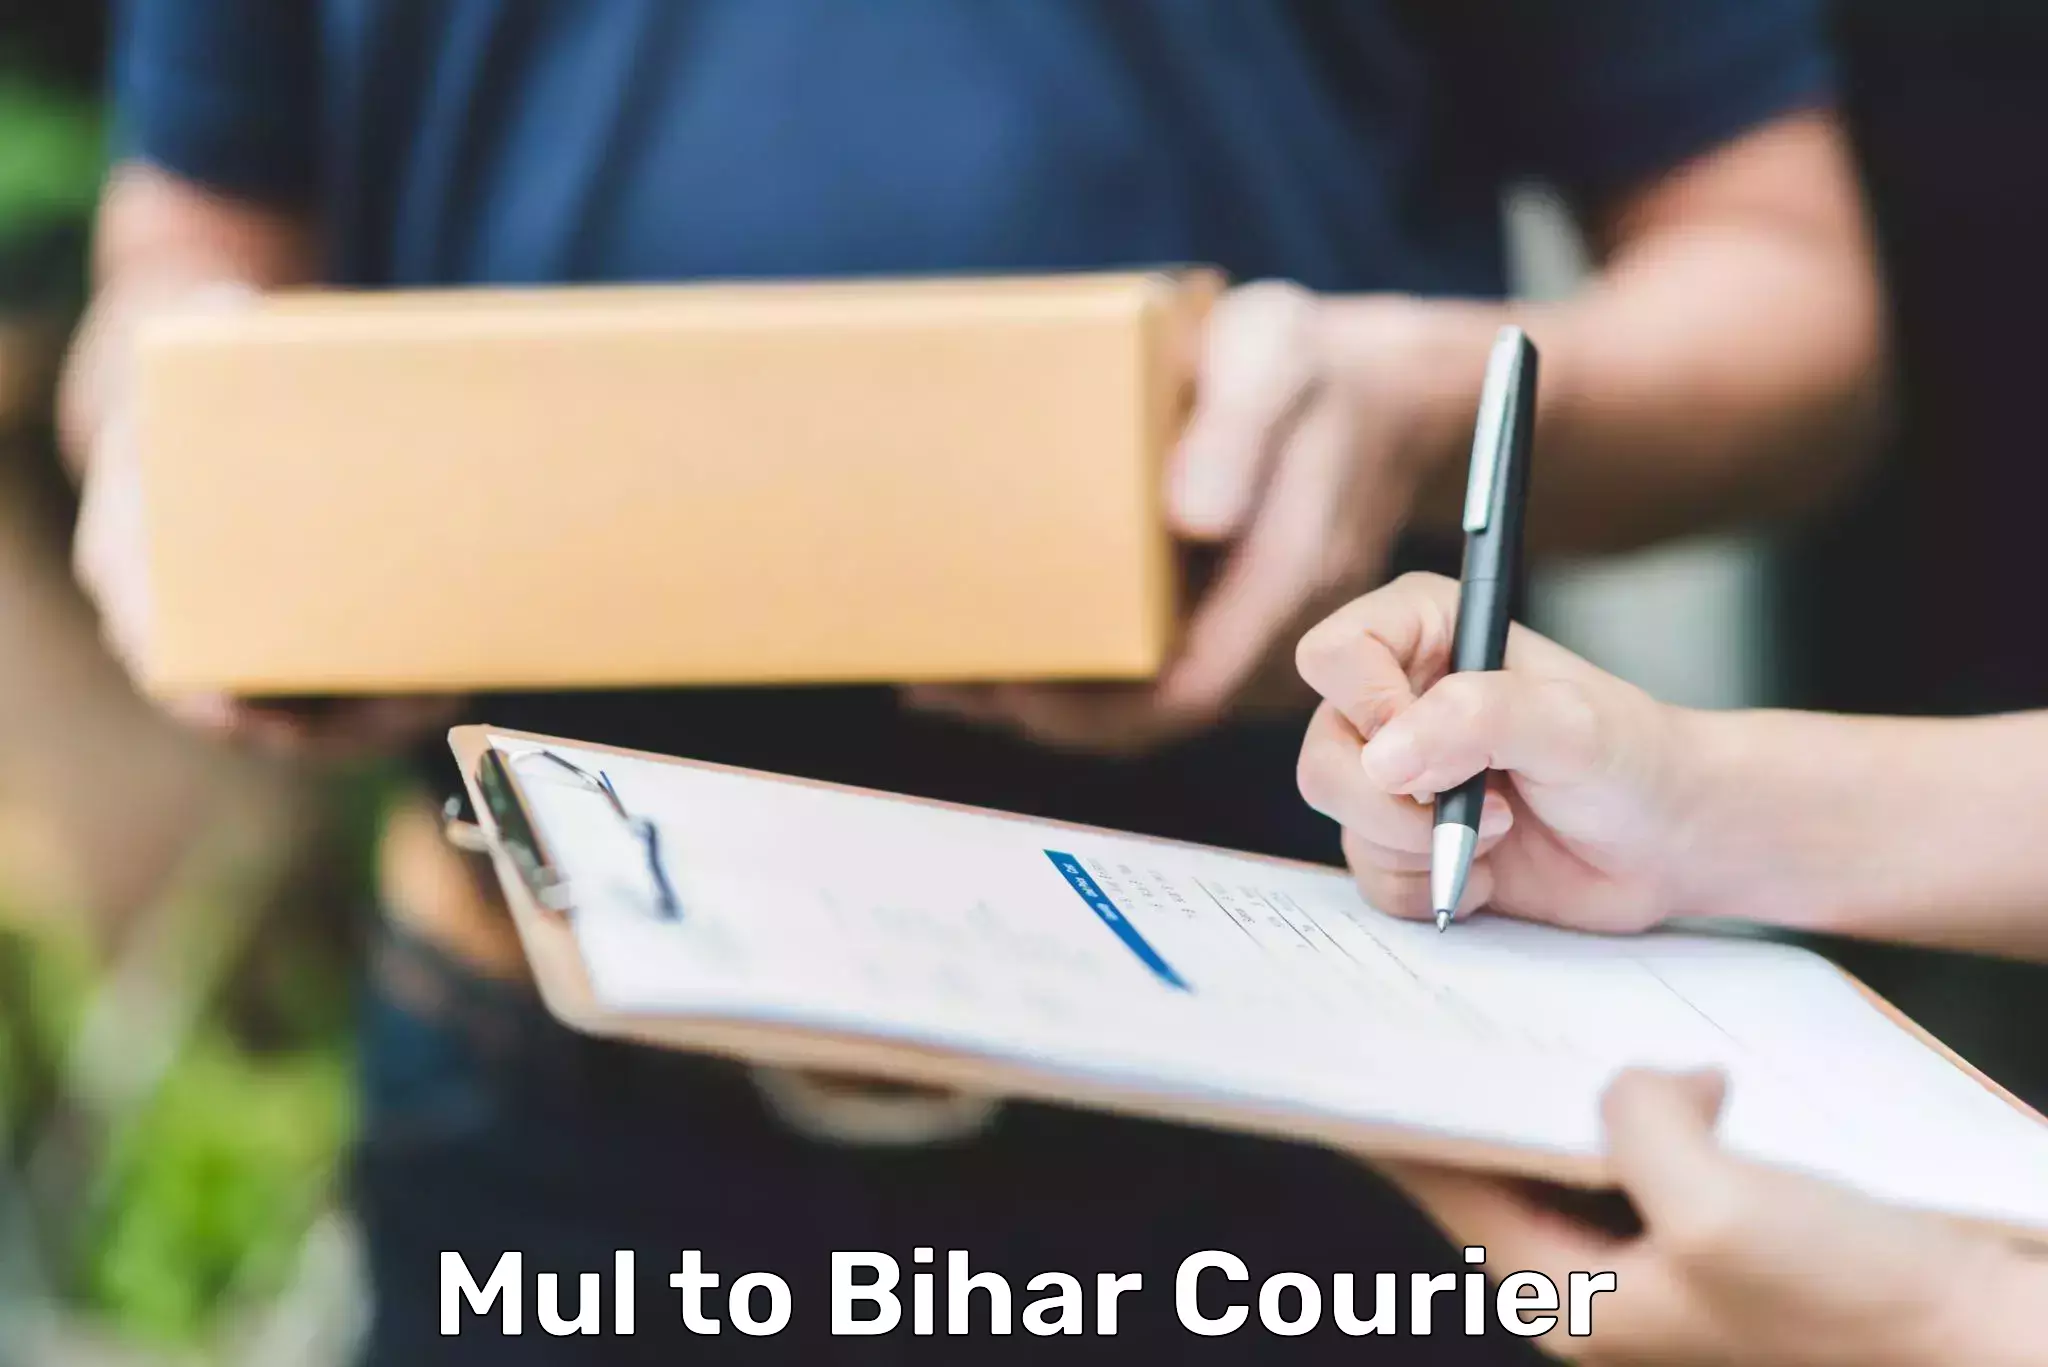 Cash on delivery service Mul to Chakai